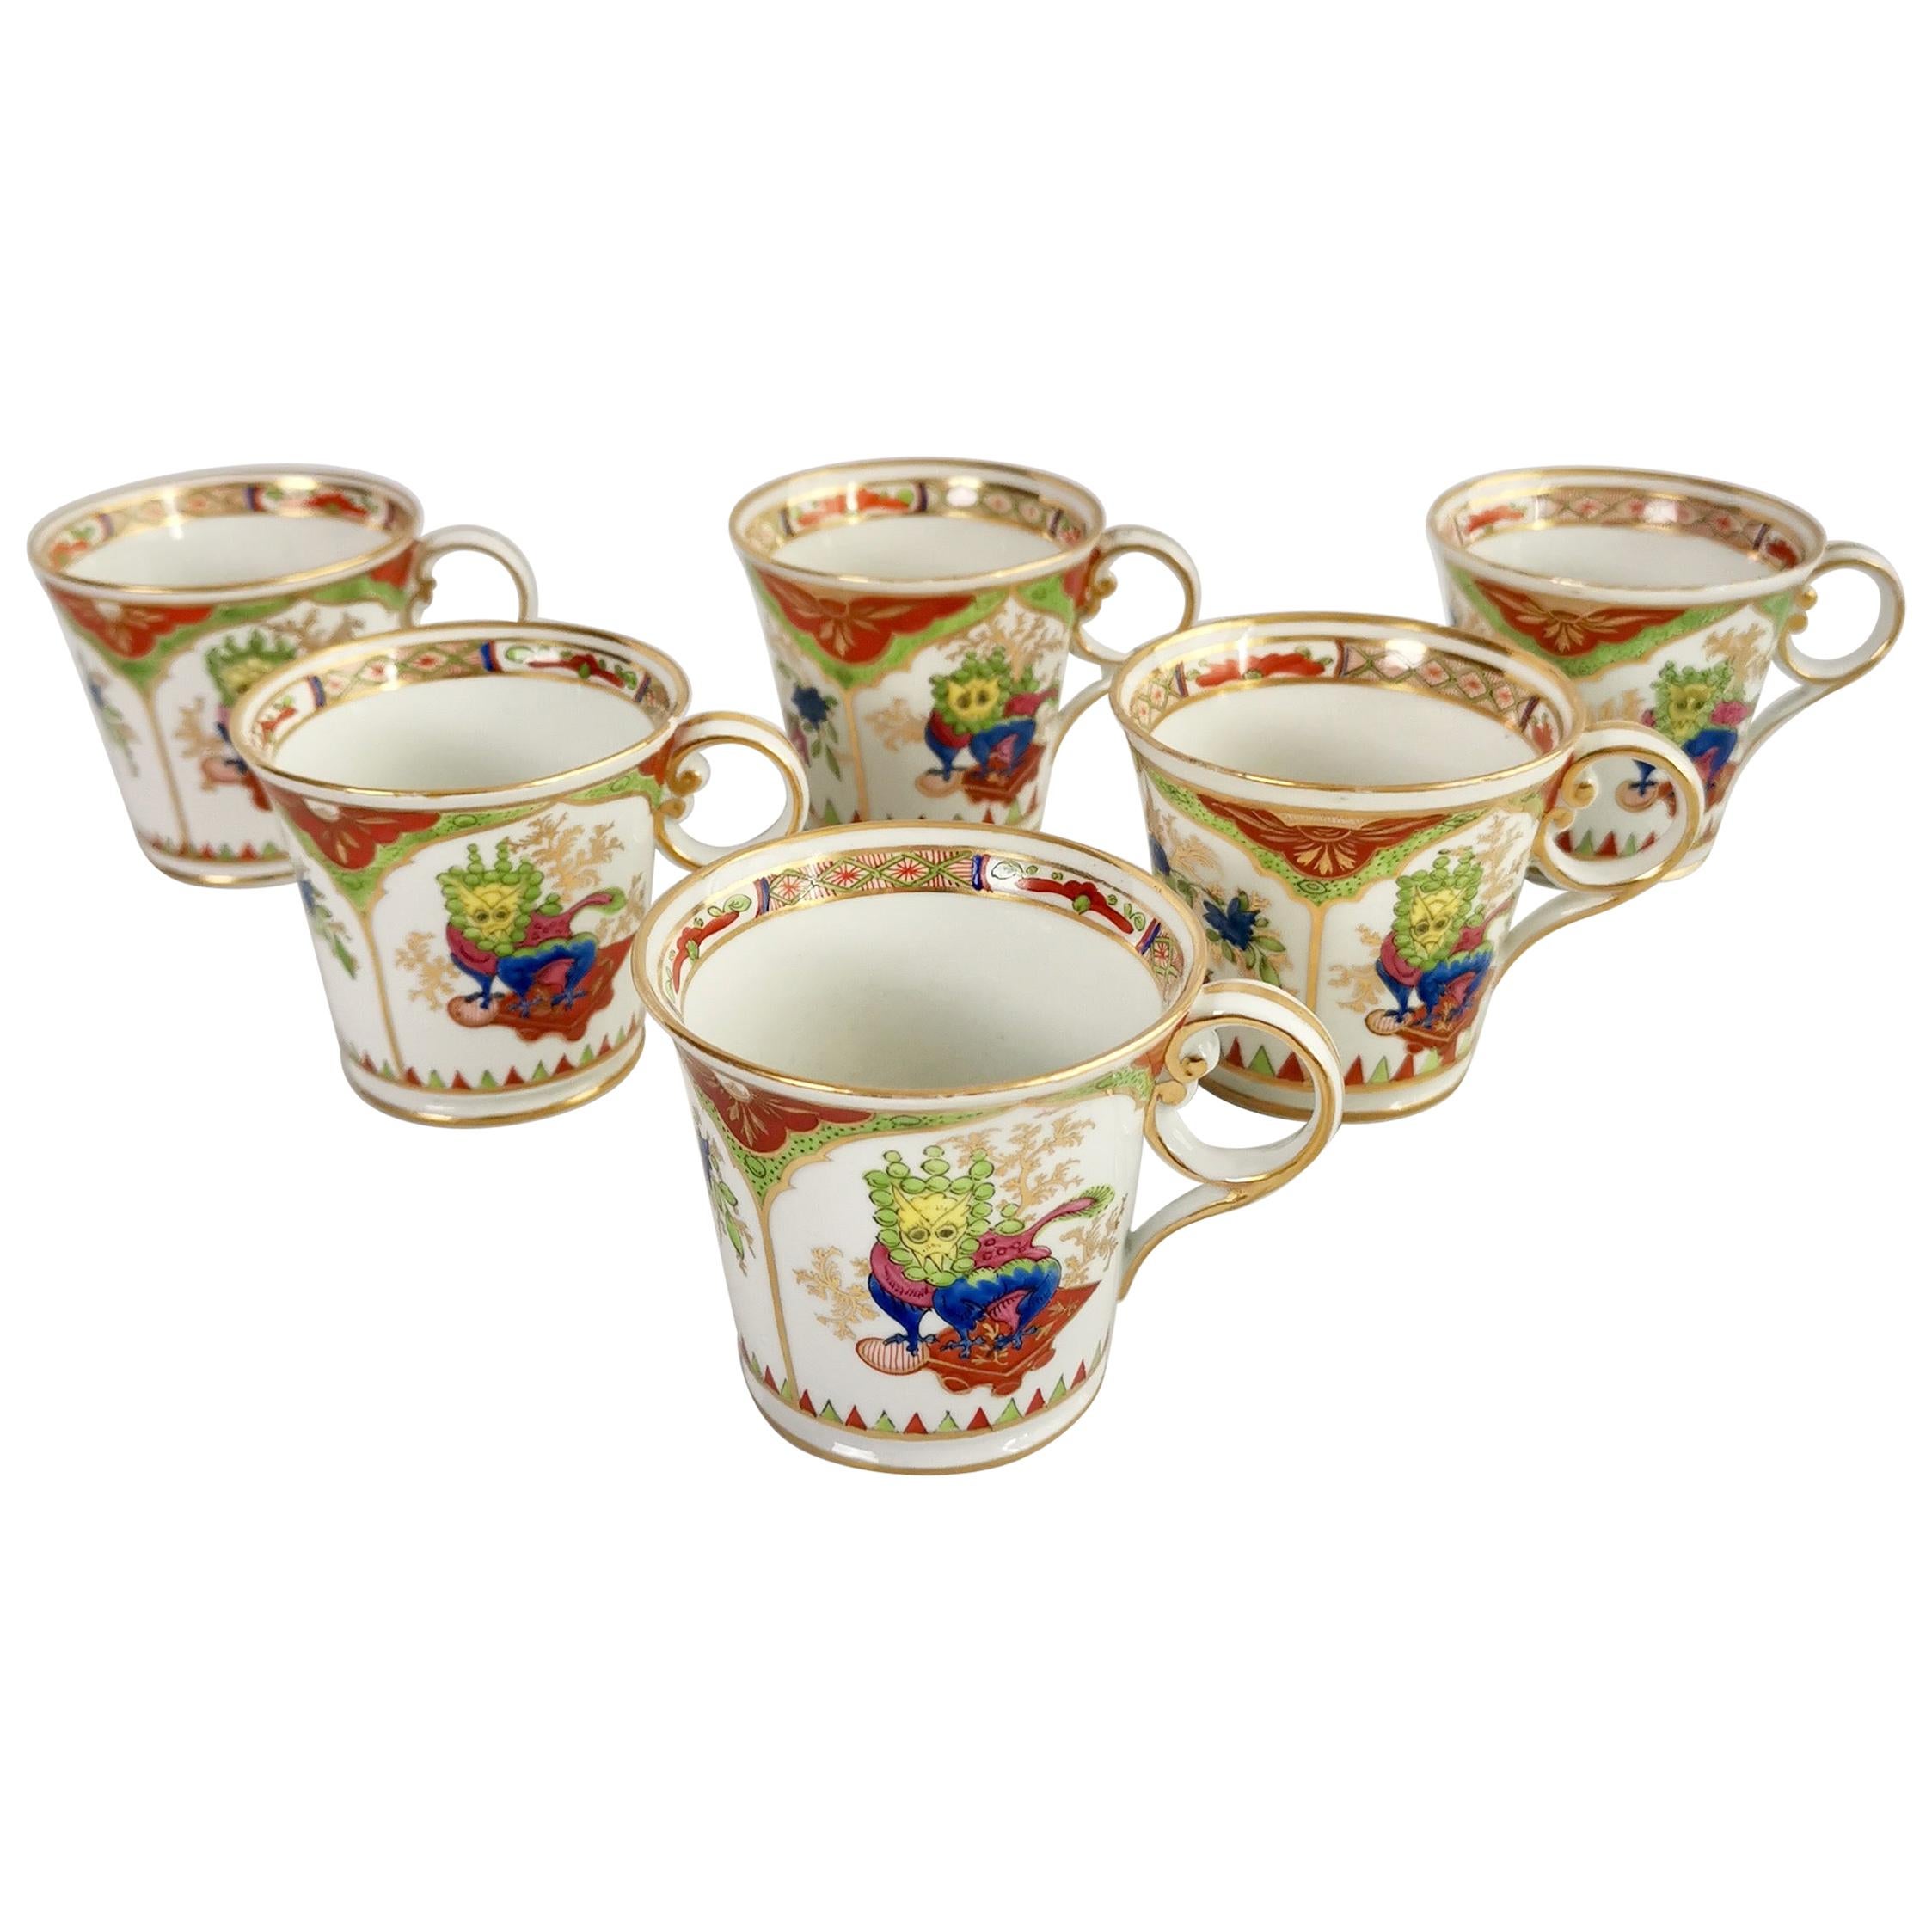 Set of 6 Chamberlain's Worcester Porcelain Coffee Cups, Dragons, circa 1810